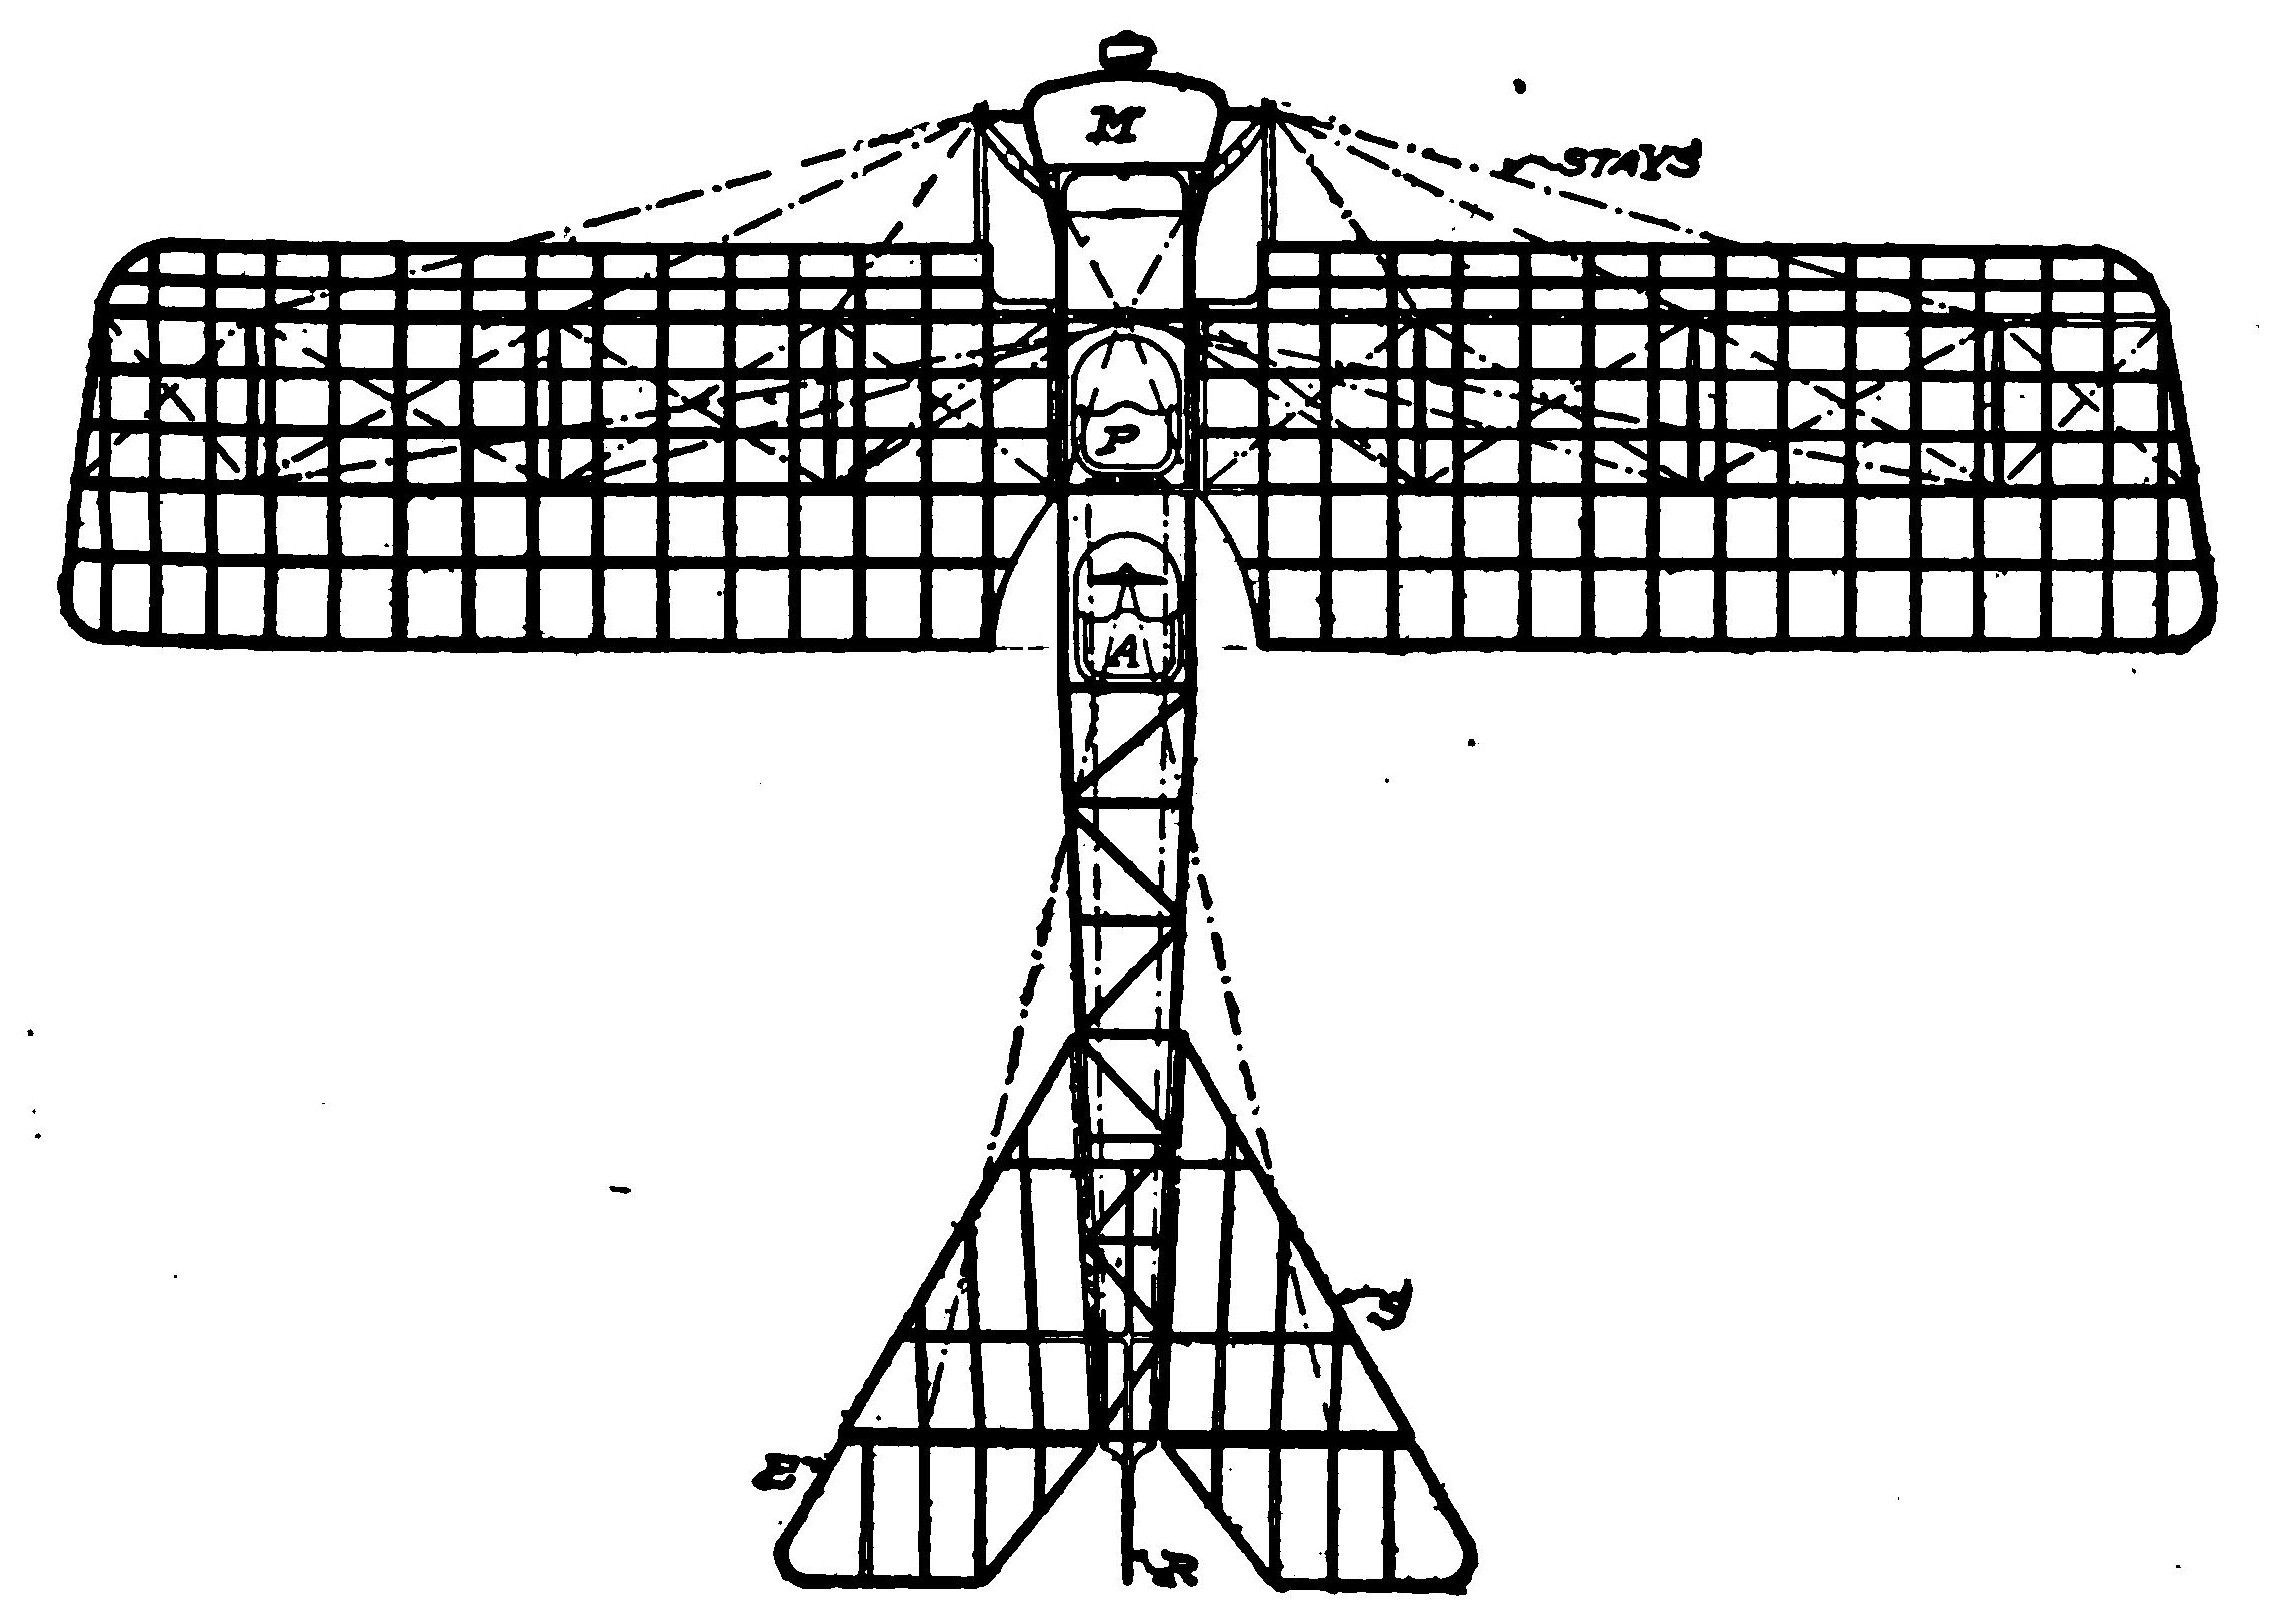 Fig. 10. Complete Framing Plan of Typical Monoplane Structure.